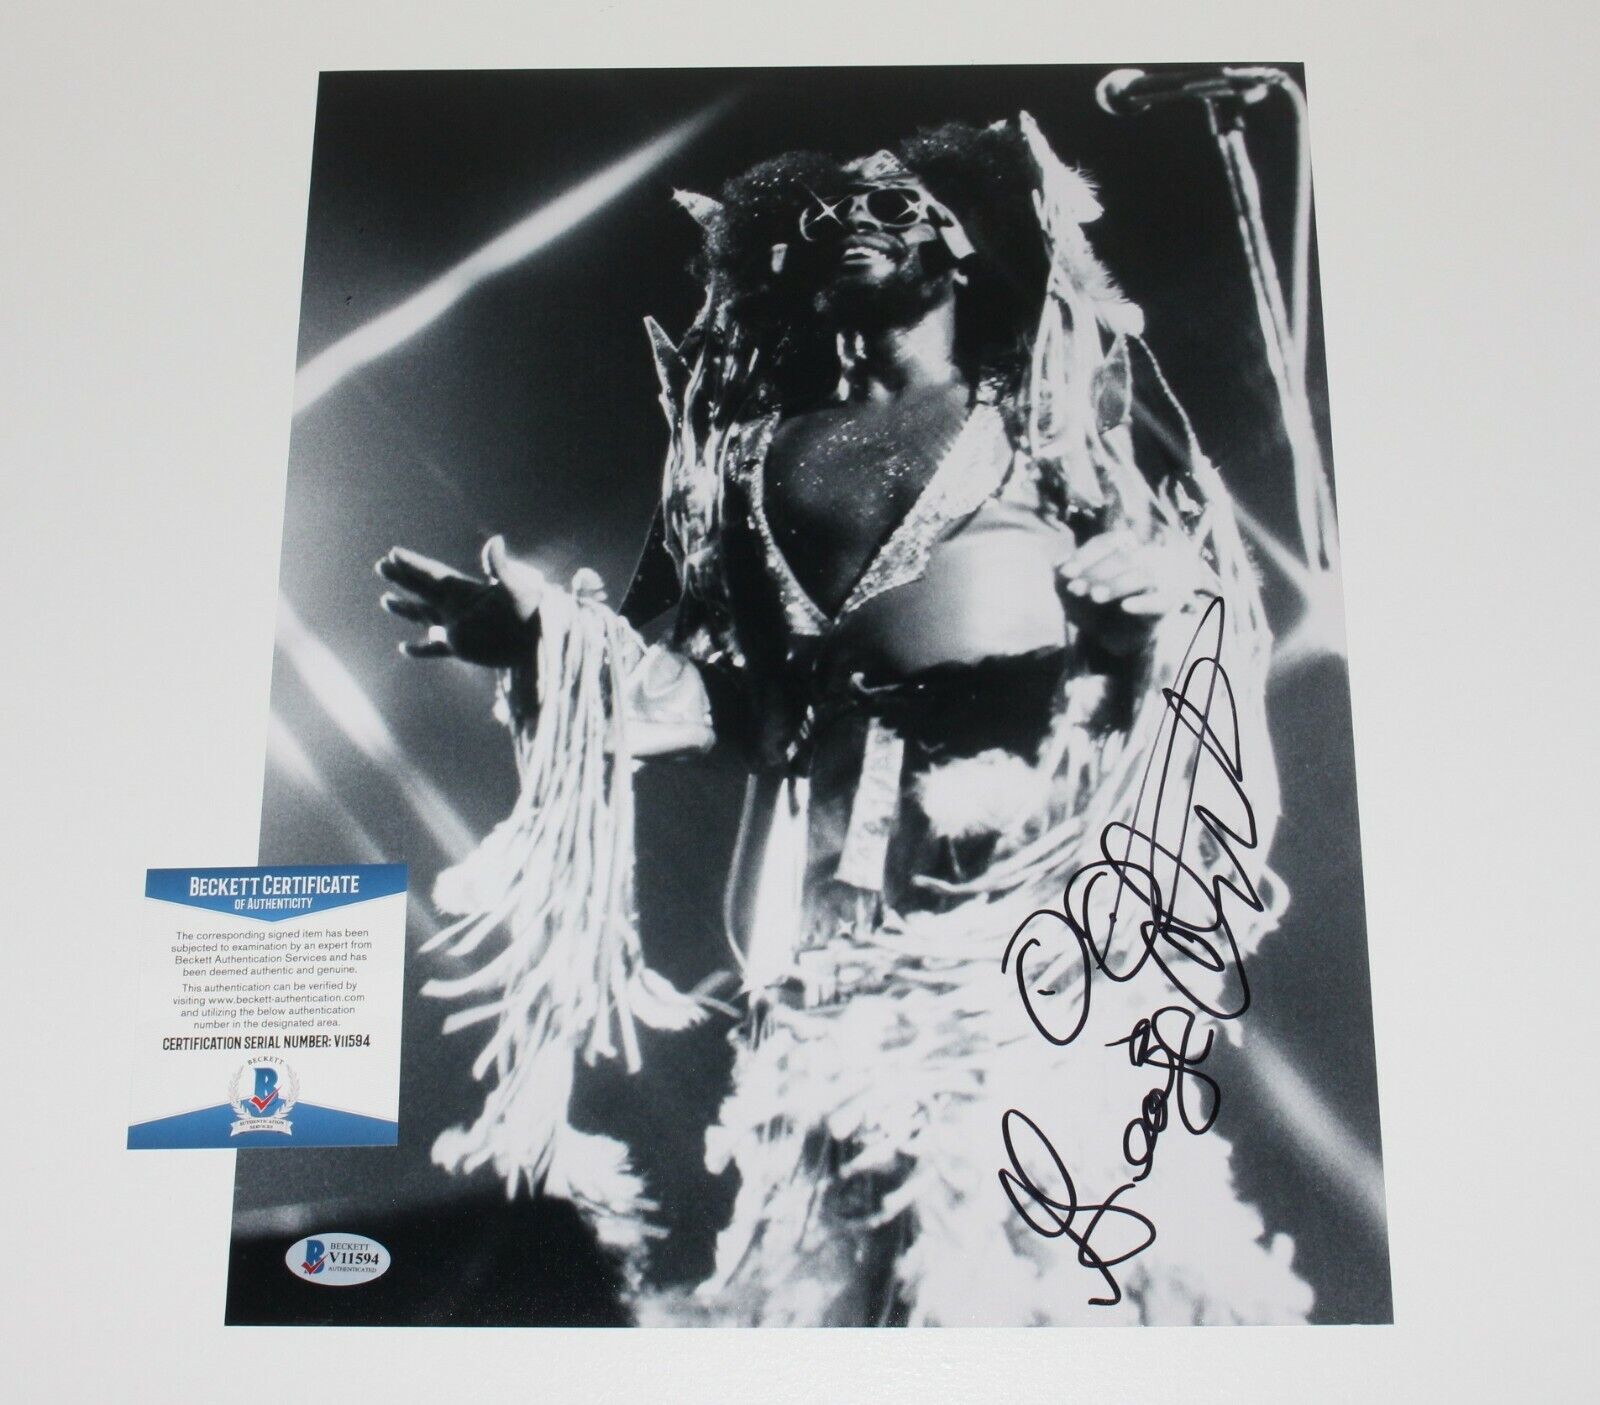 SINGER GEORGE CLINTON SIGNED PARLIAMENT FUNKADELIC 11x14 Photo Poster painting 1 BECKETT COA BAS